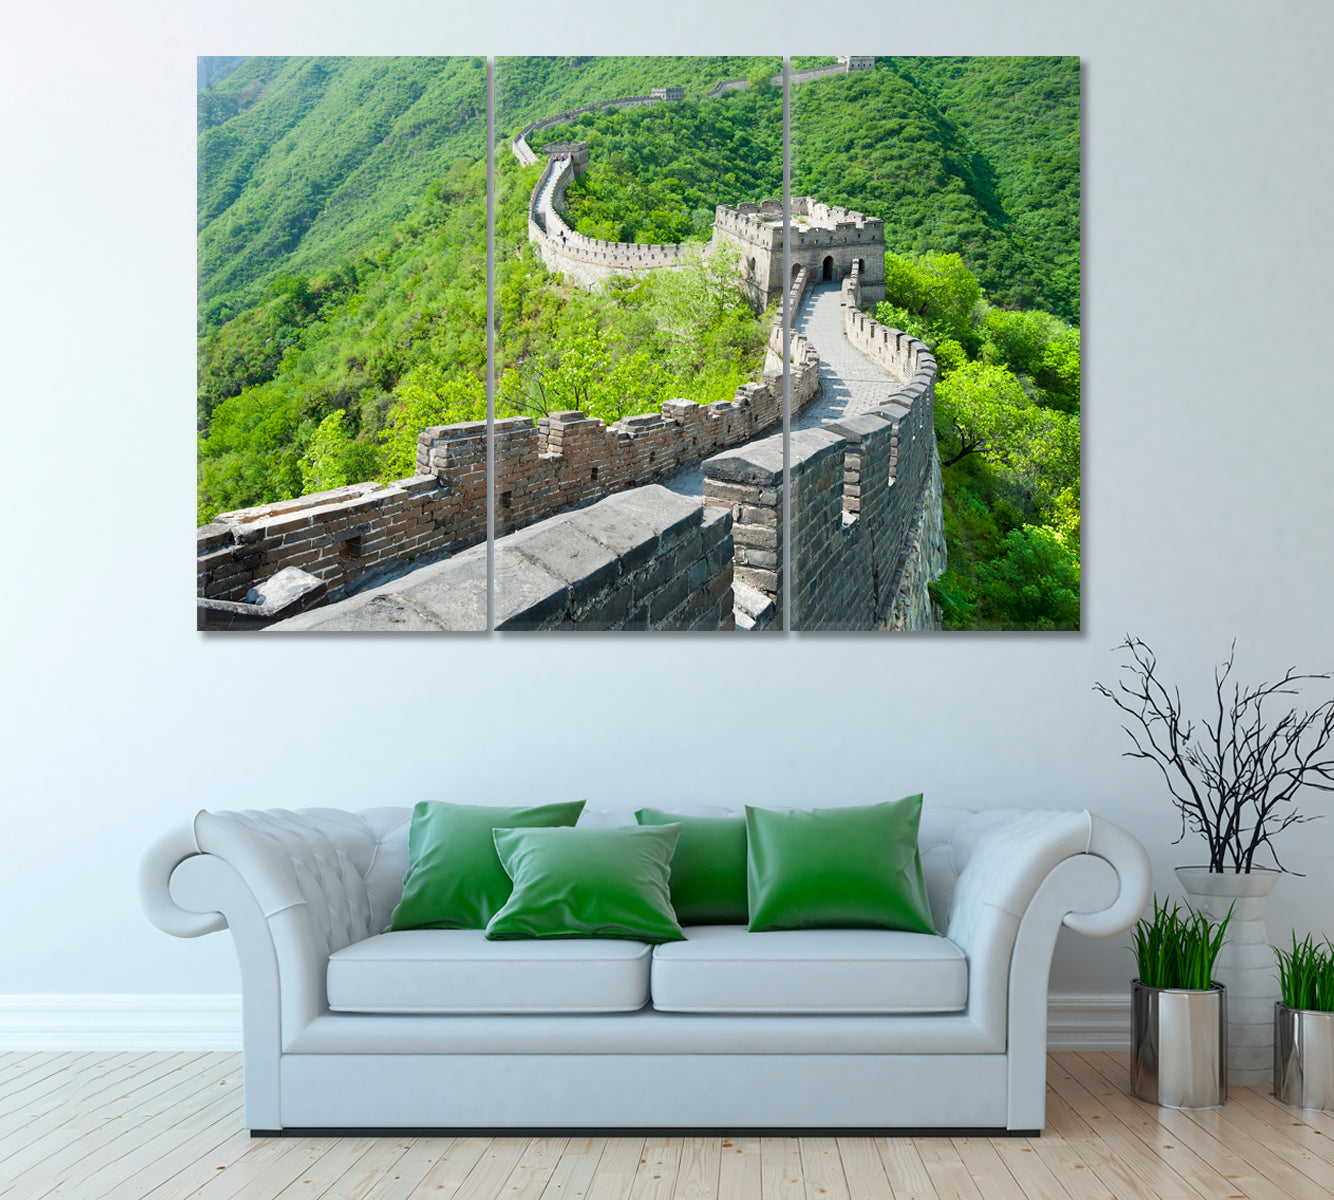 Great Wall of China Mutianyu Beijing Canvas Print ArtLexy 3 Panels 36"x24" inches 